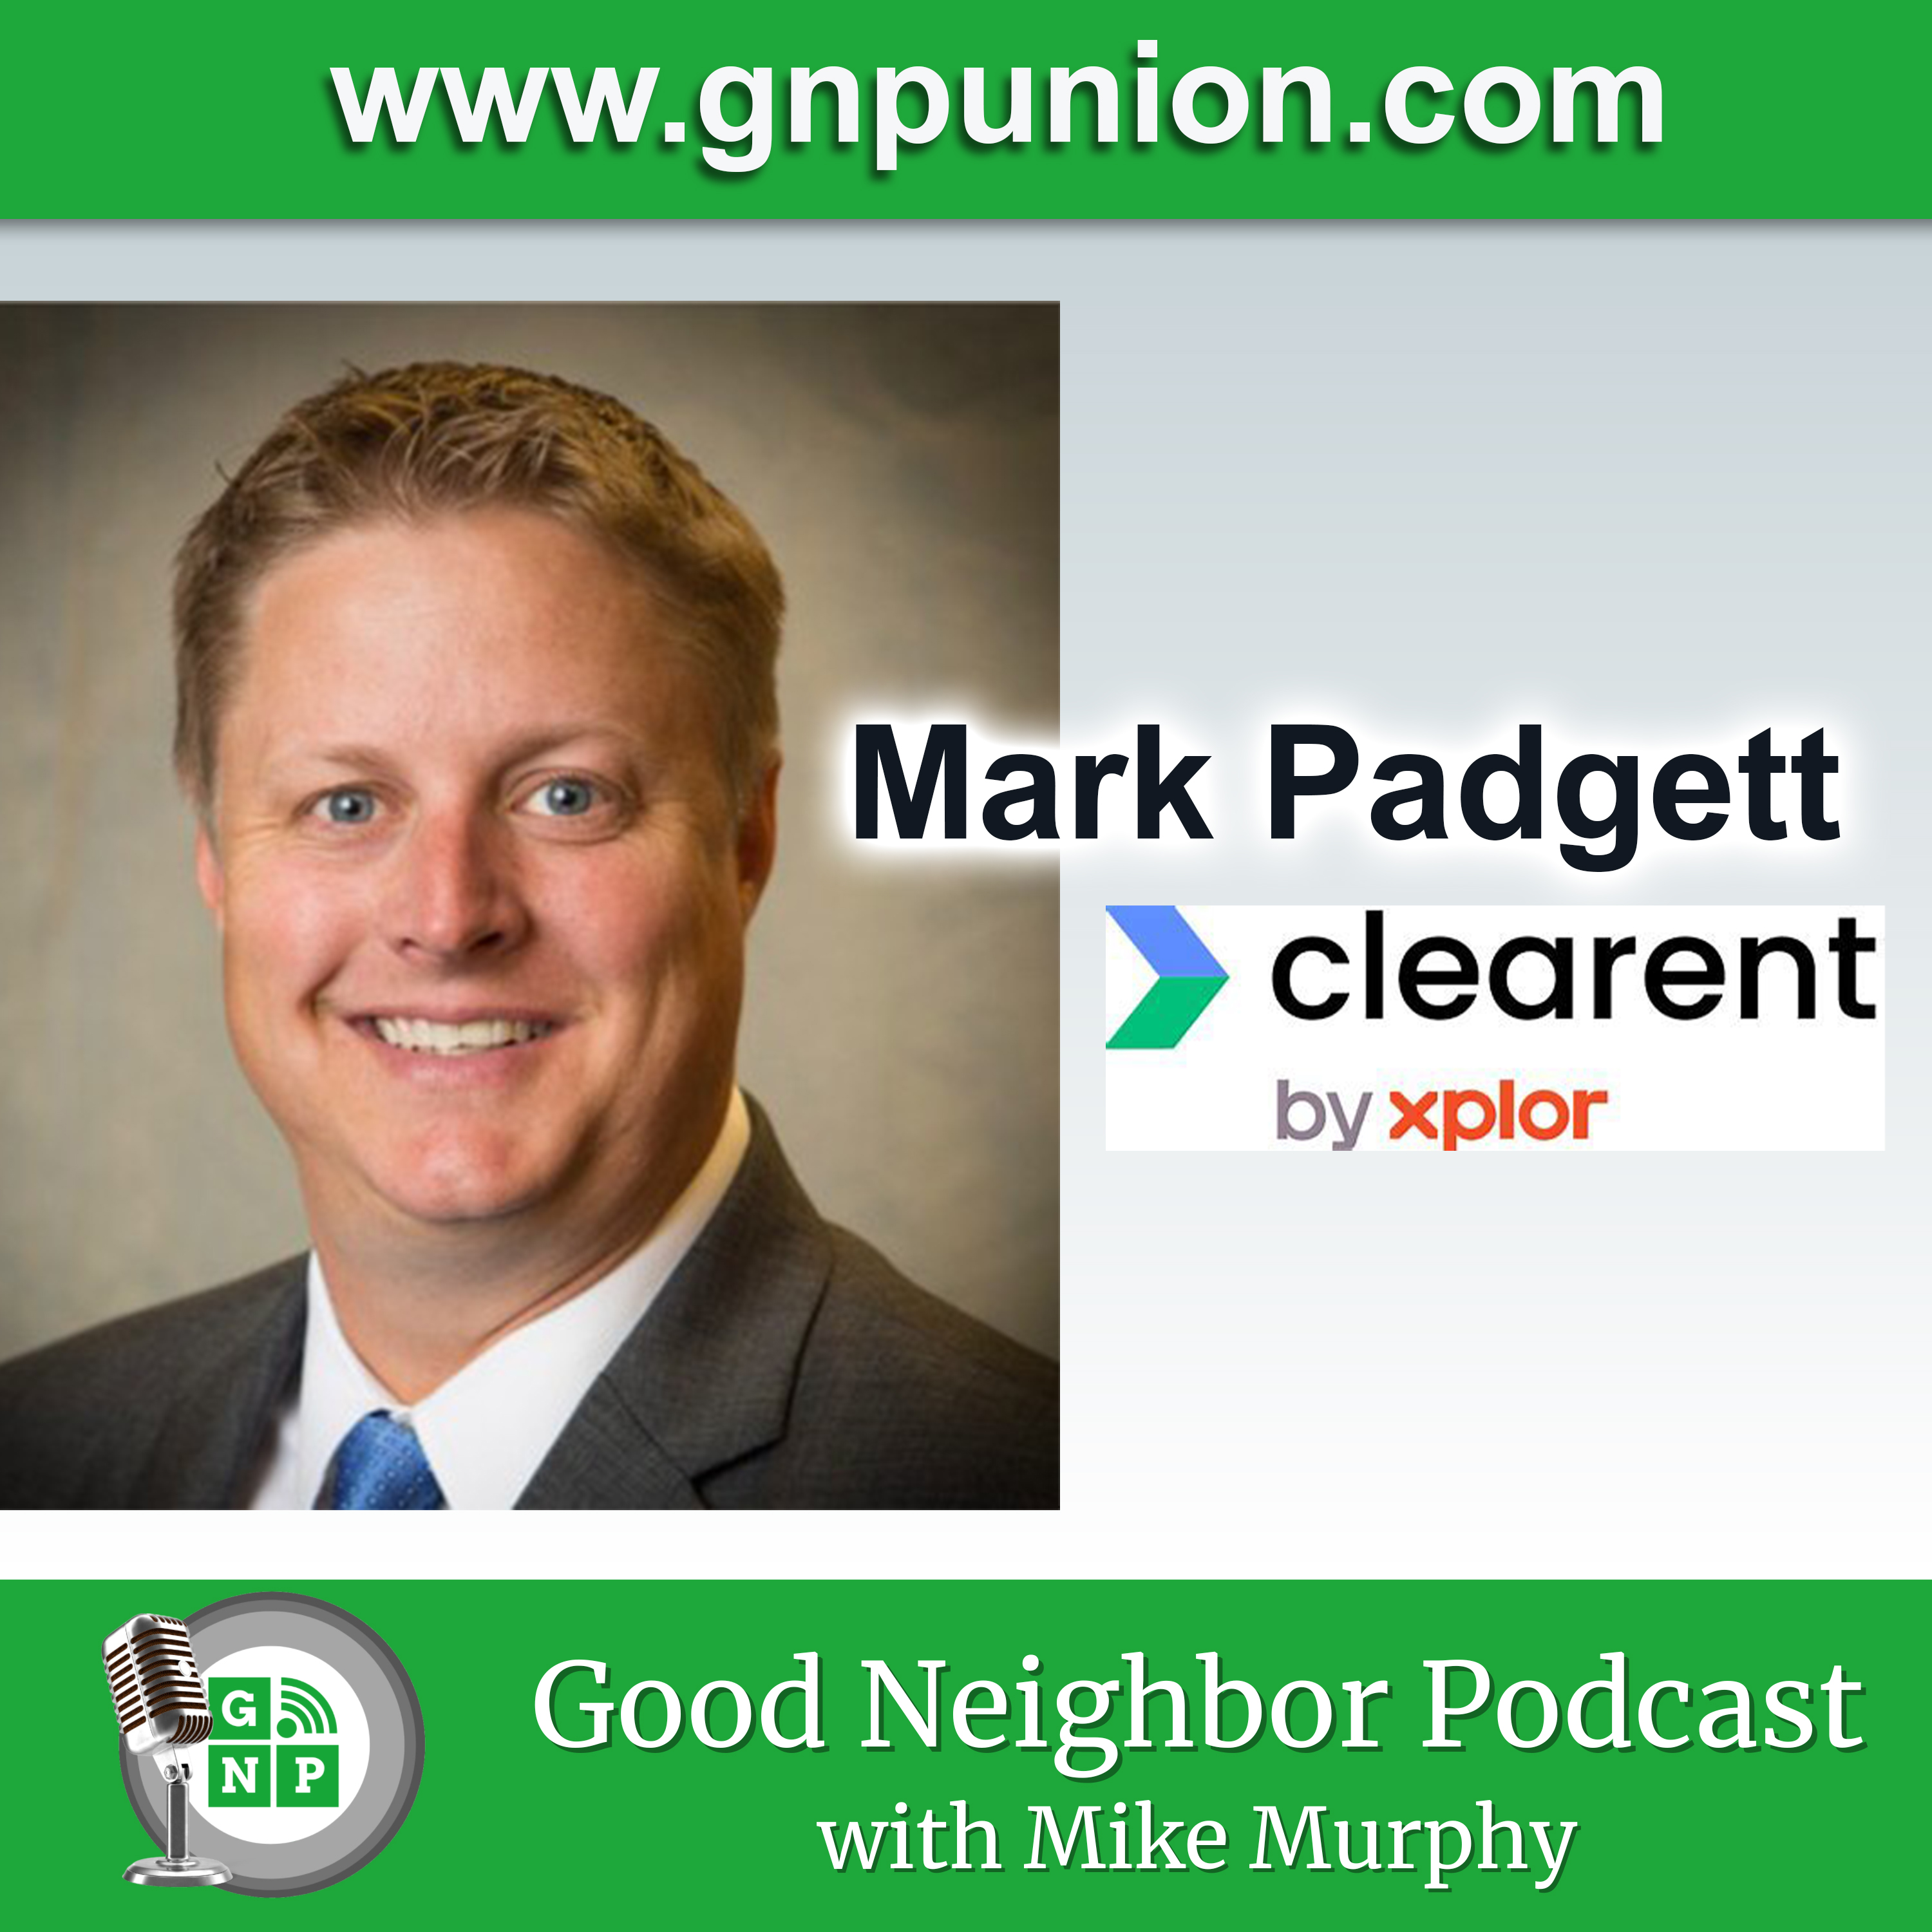 Revolutionizing Payments and Life Lessons from the Field with Mark Padgett